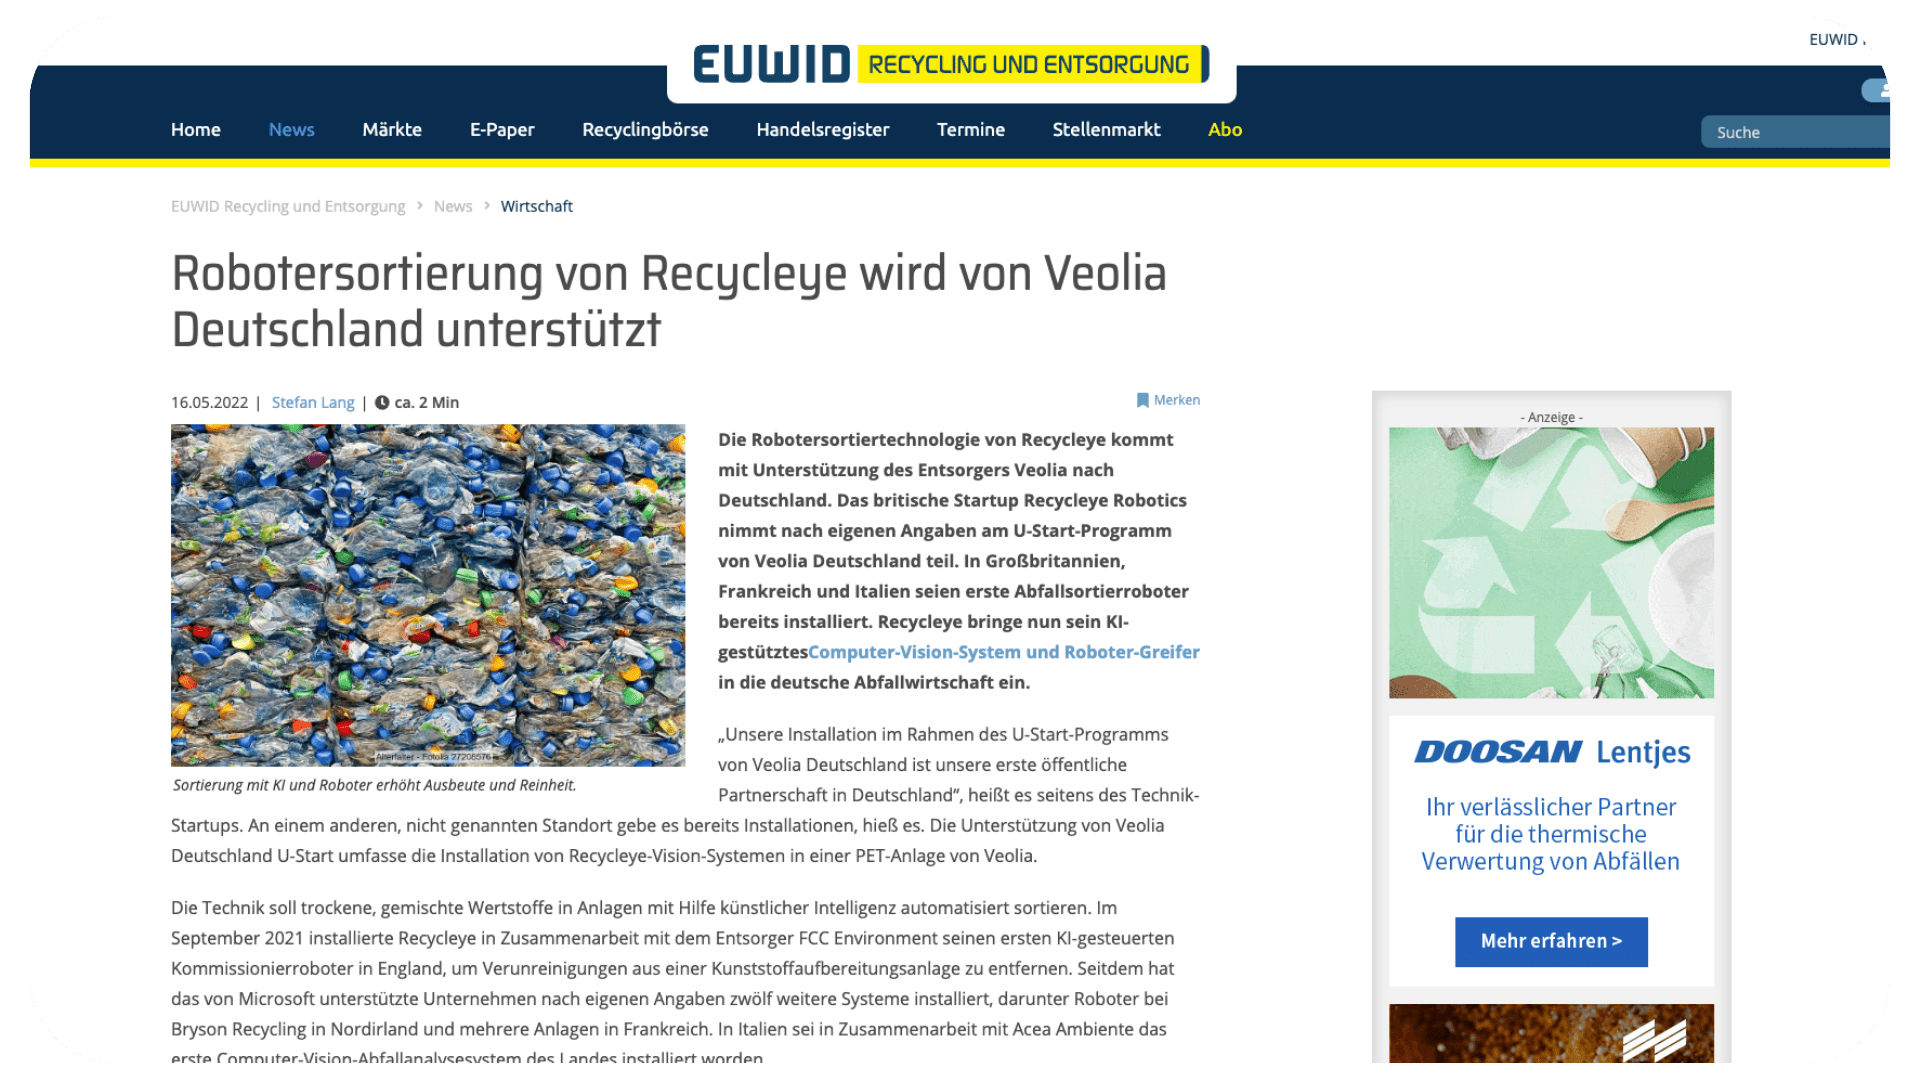 euwid recycling article on Recycleye